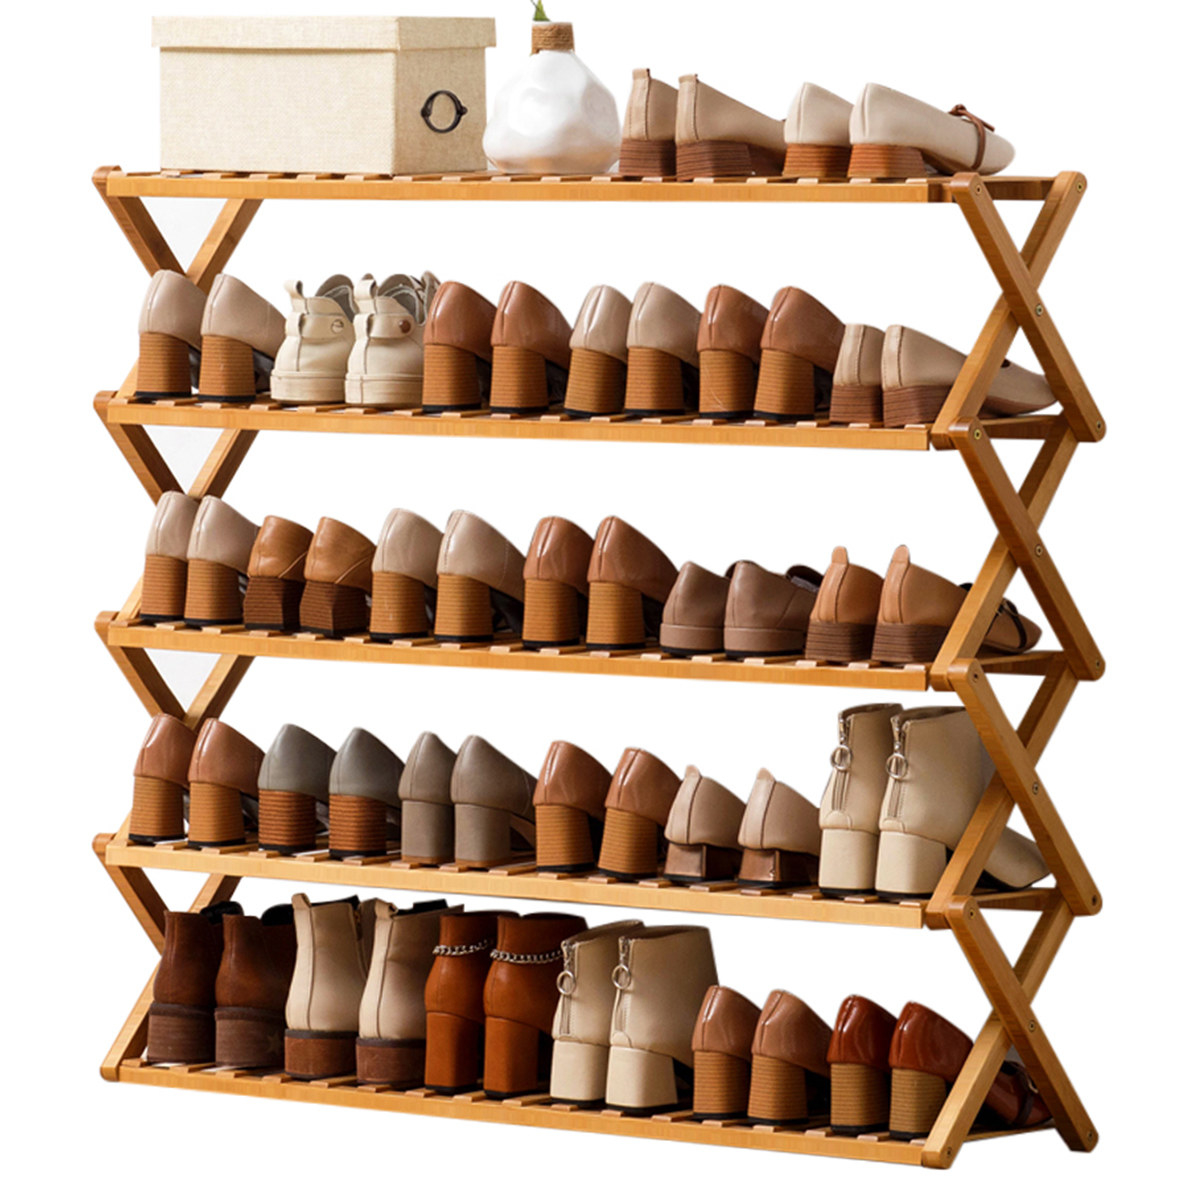 Shoe rack filled with pairs of shoes.